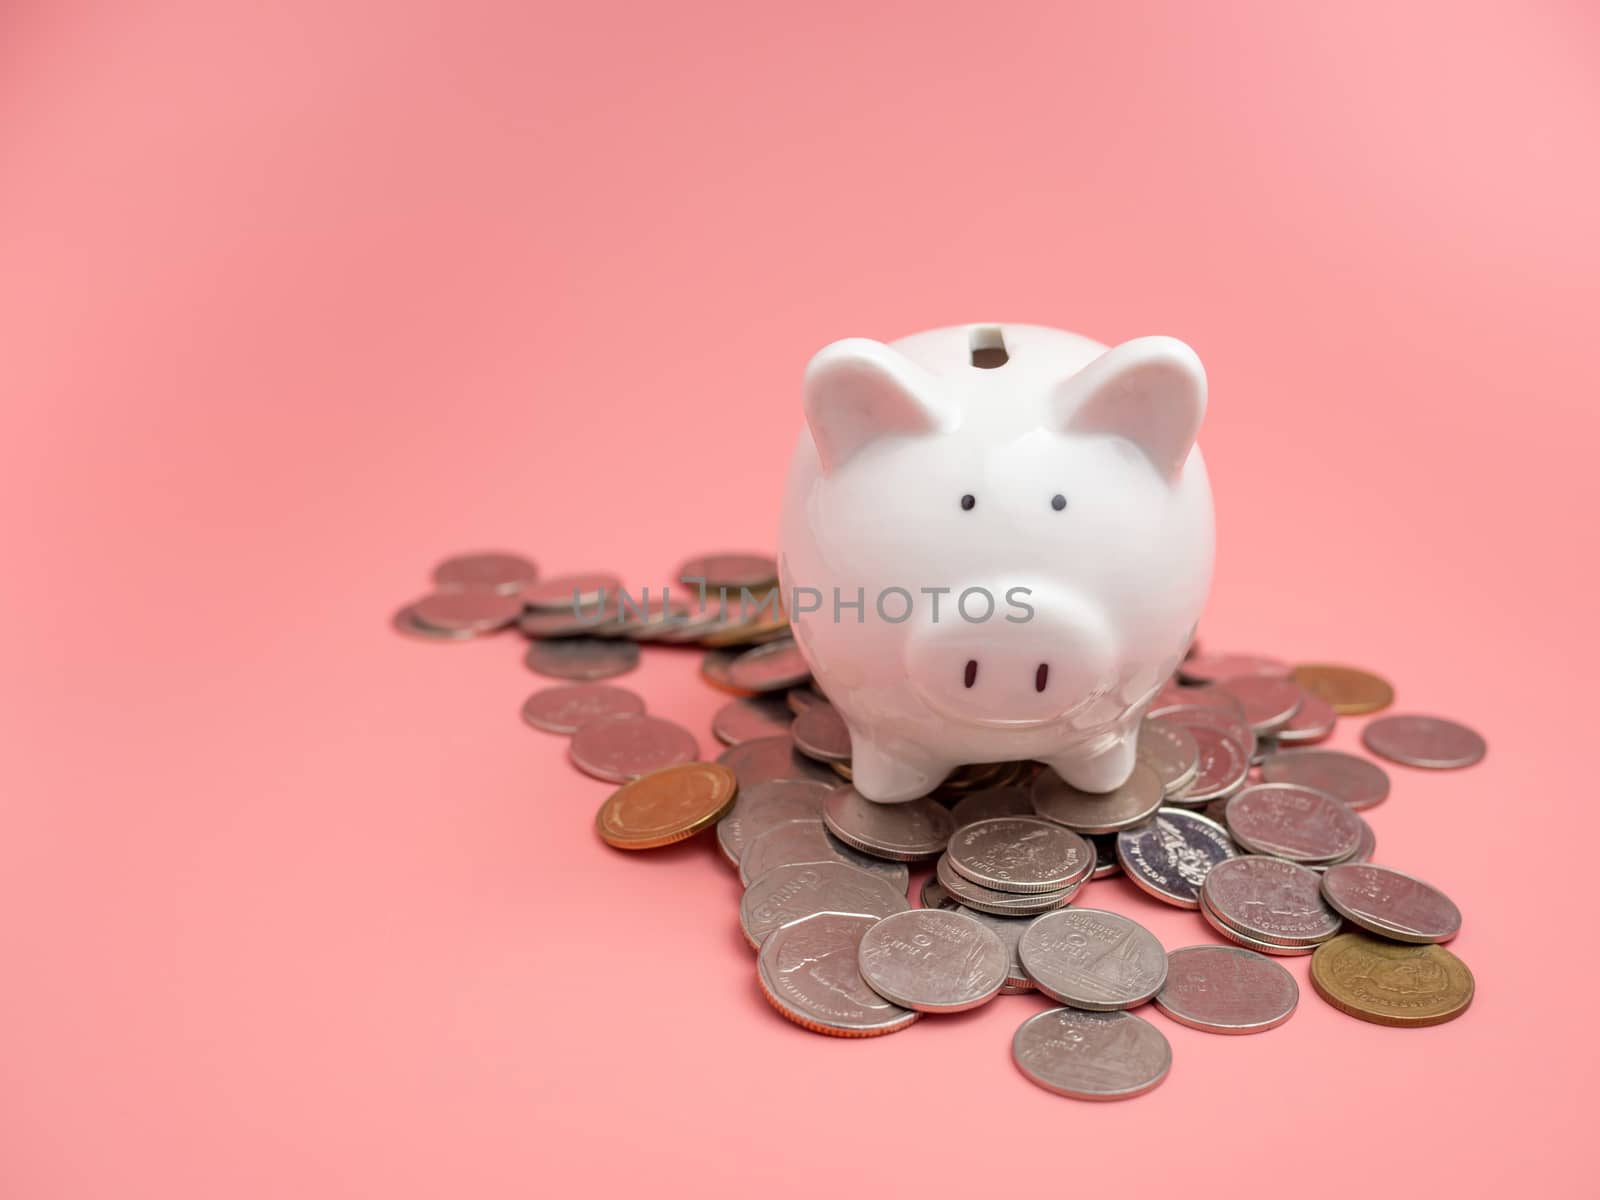 White piggy bank Placed on top of a pile of coins On a pink background. saving money concept.